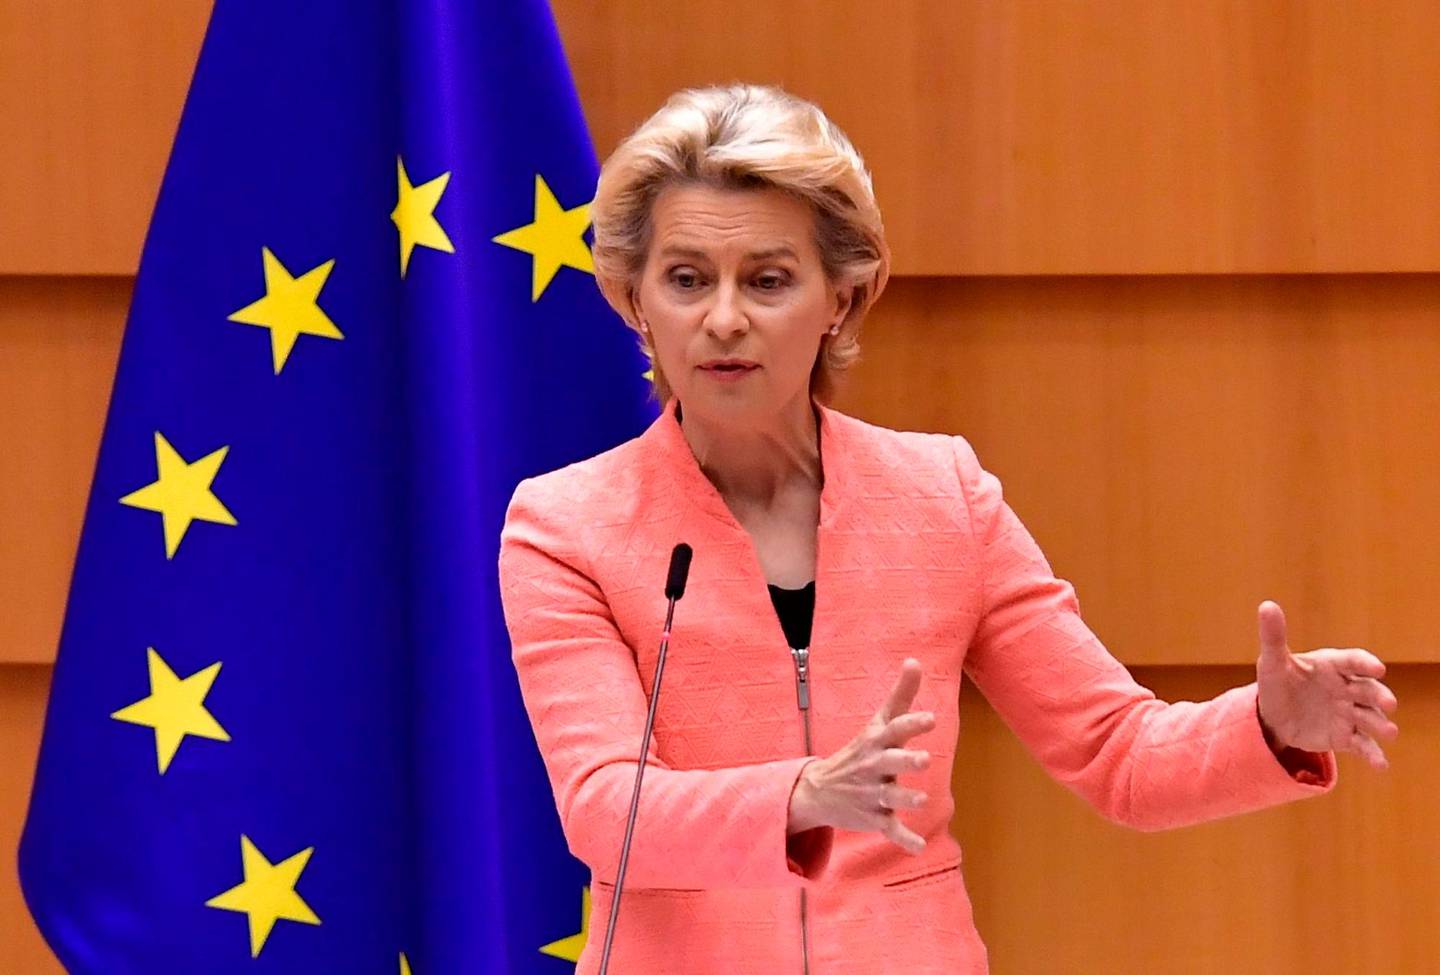 The President of the European Commission Ursula Von der Leyen addresses her first state of the union speech during a plenary session at the European Union Parliament in Brussels on September 16, 2020. (Photo by JOHN THYS / AFP)